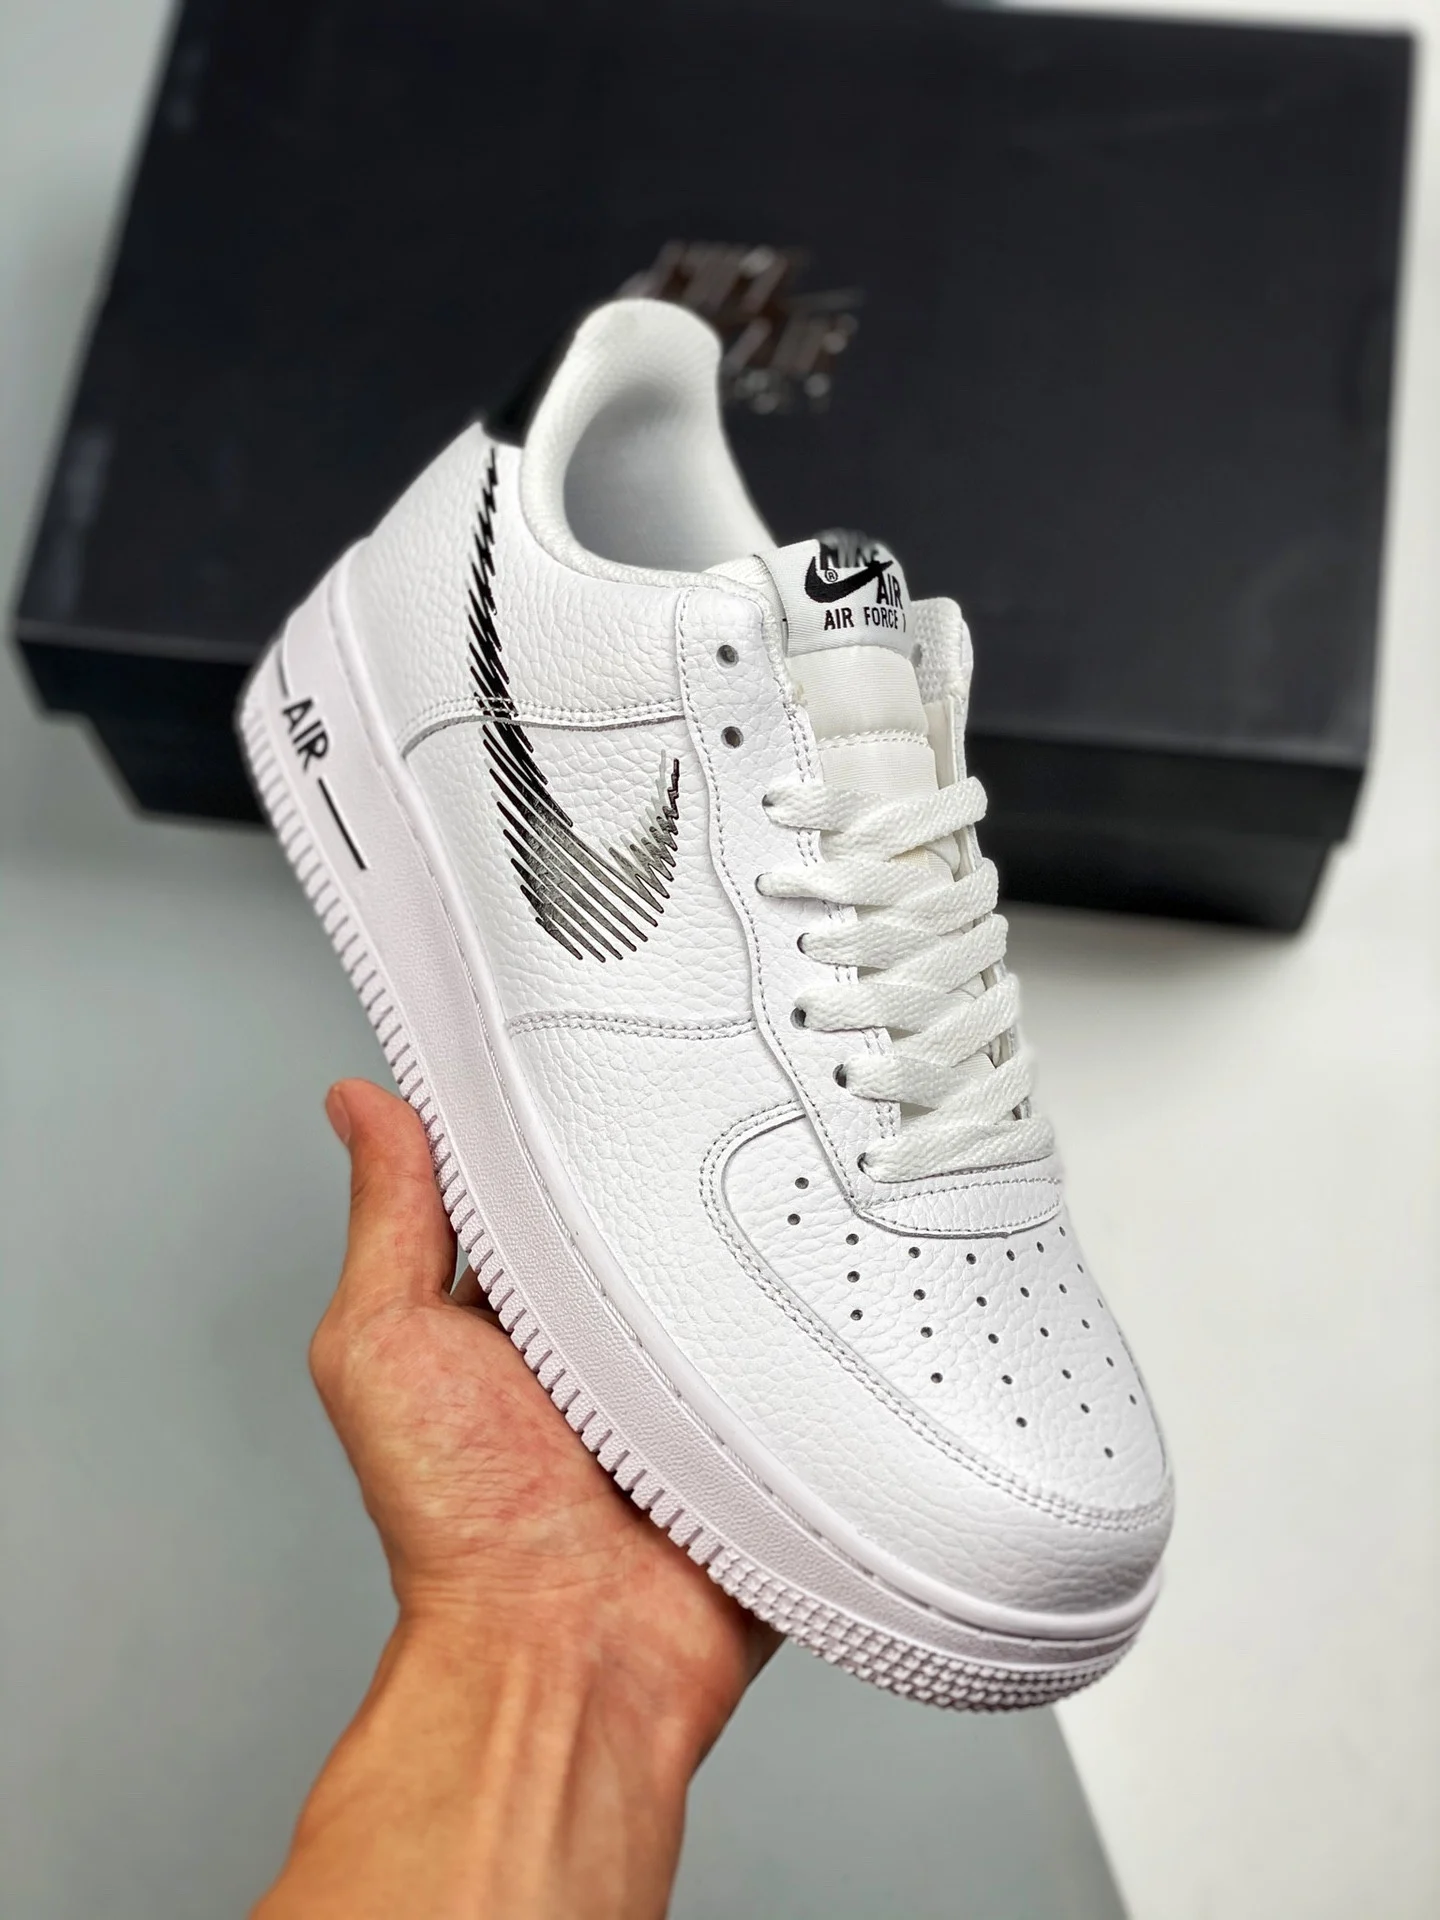 Nike Air Force 1 Low Zig Zag White Black DN4928-100 For Sale